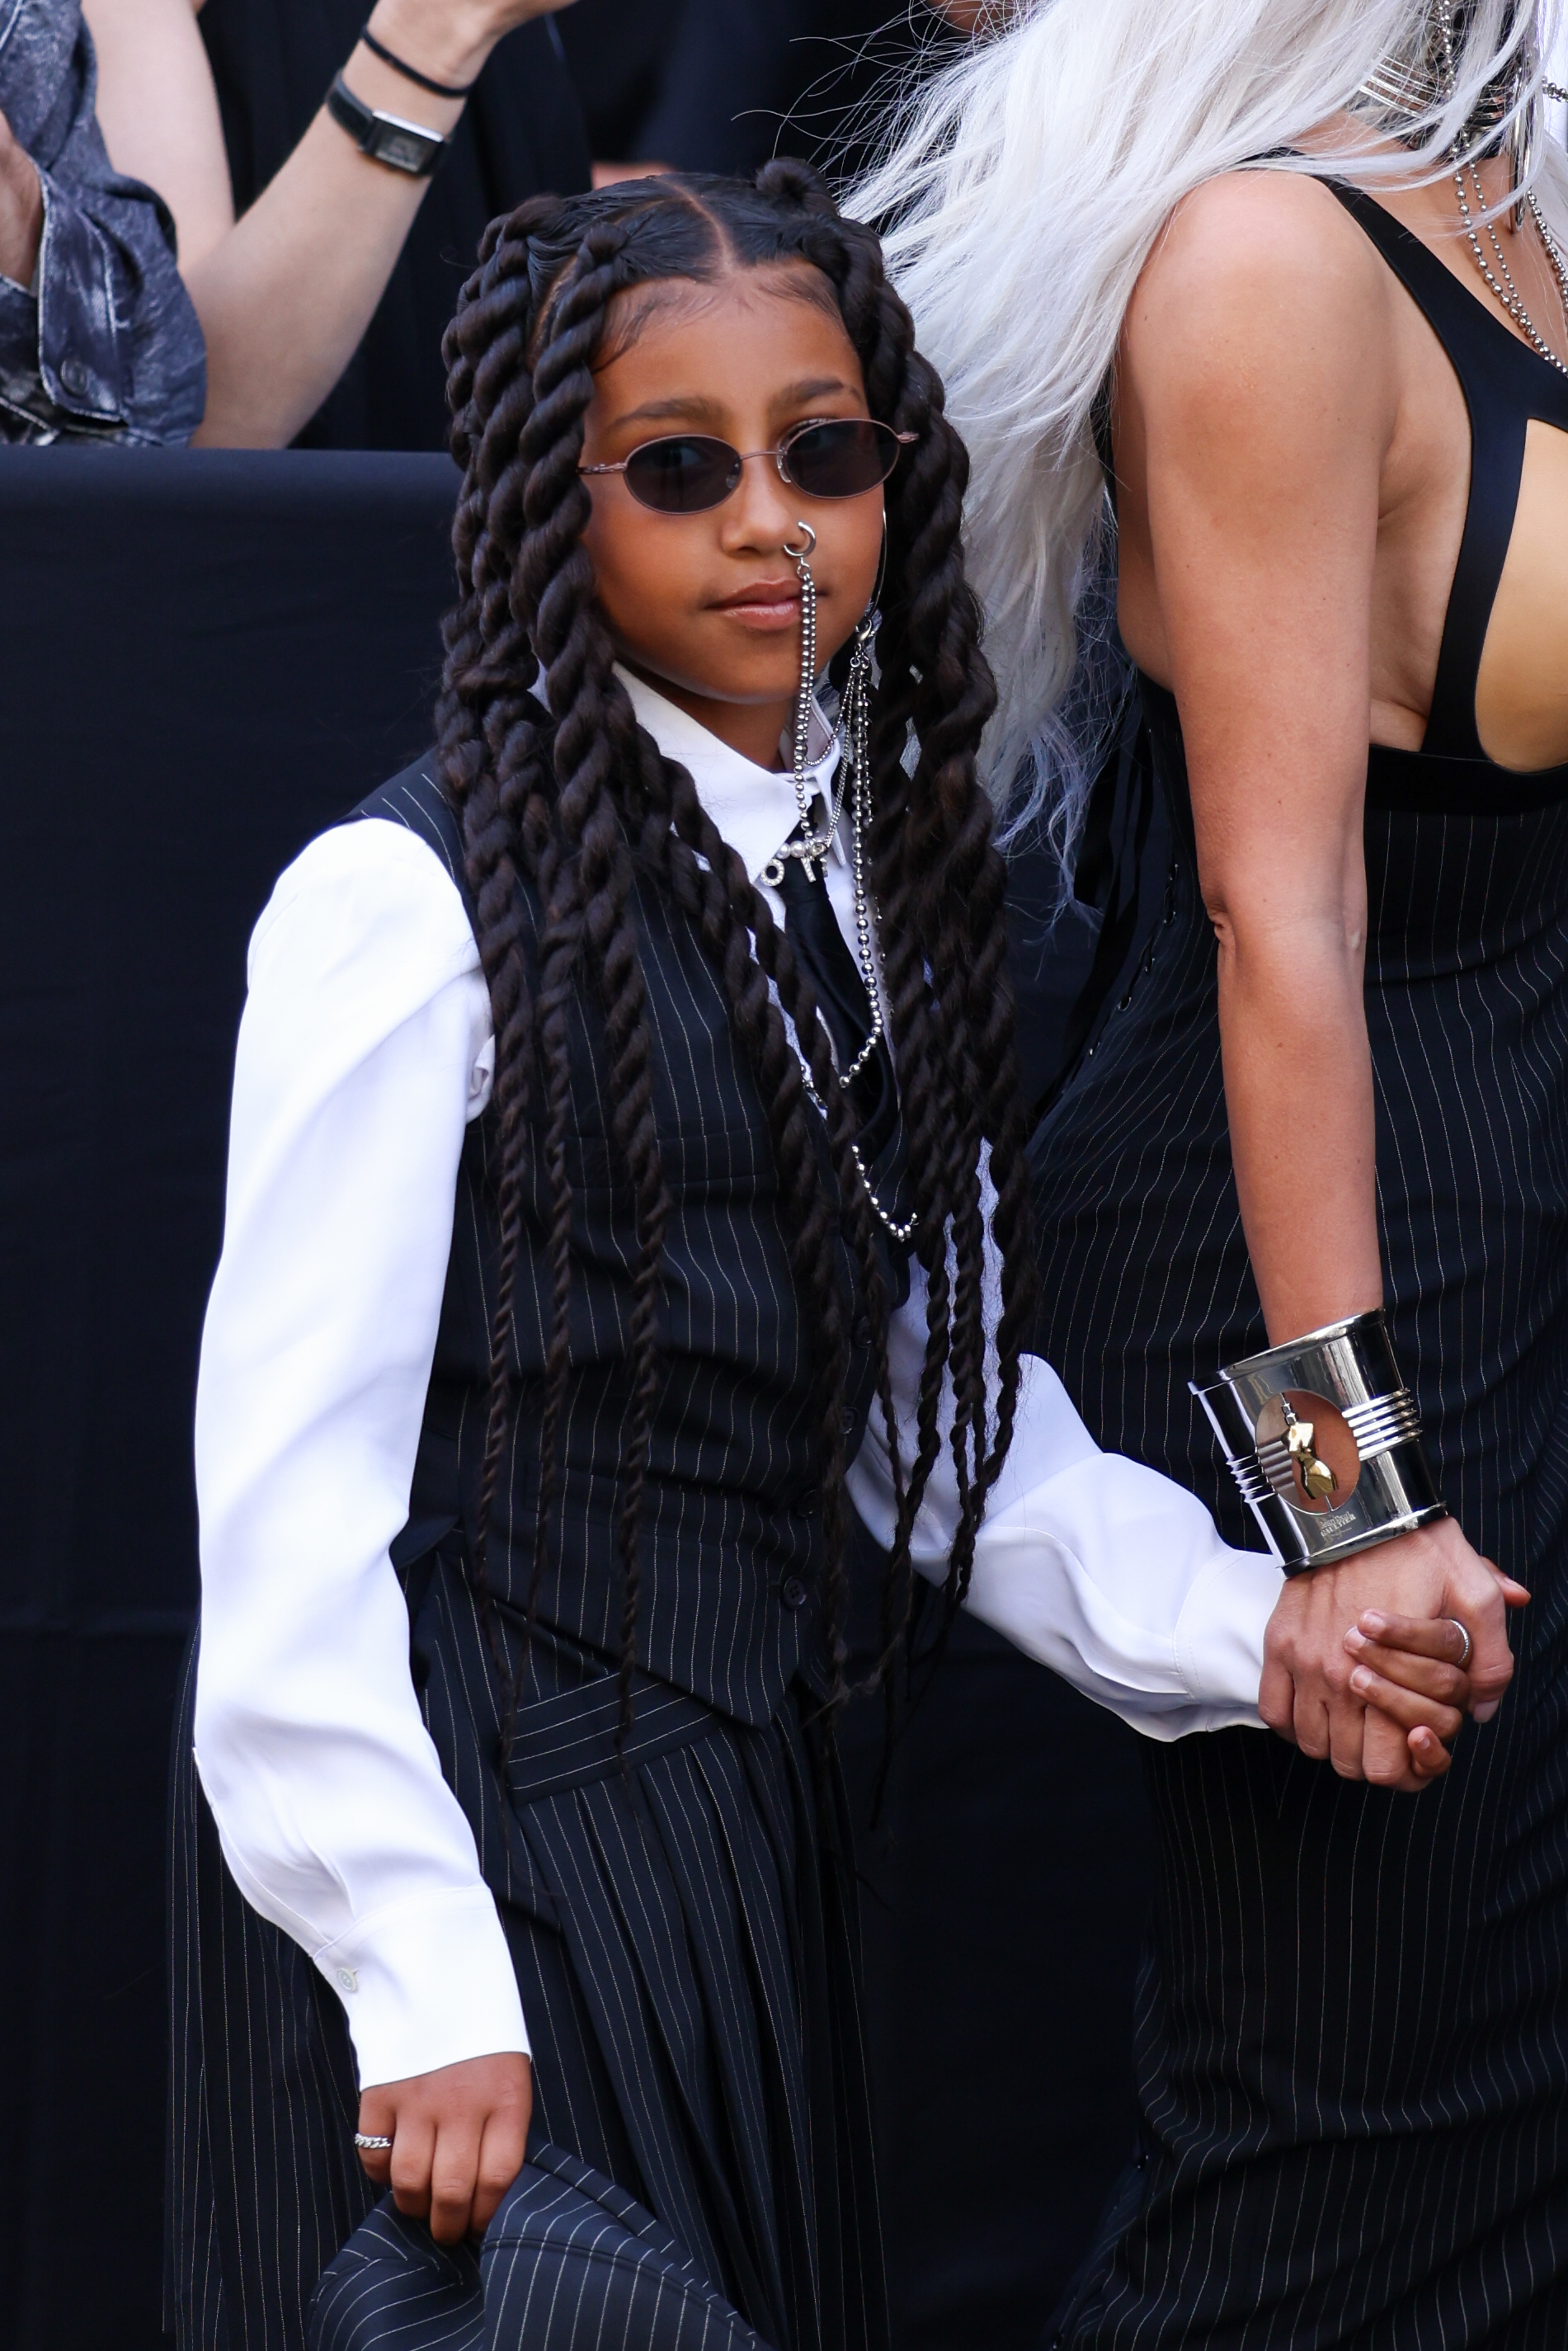 Child in a black striped suit with long braids and sunglasses, holding hands with an adult out of frame